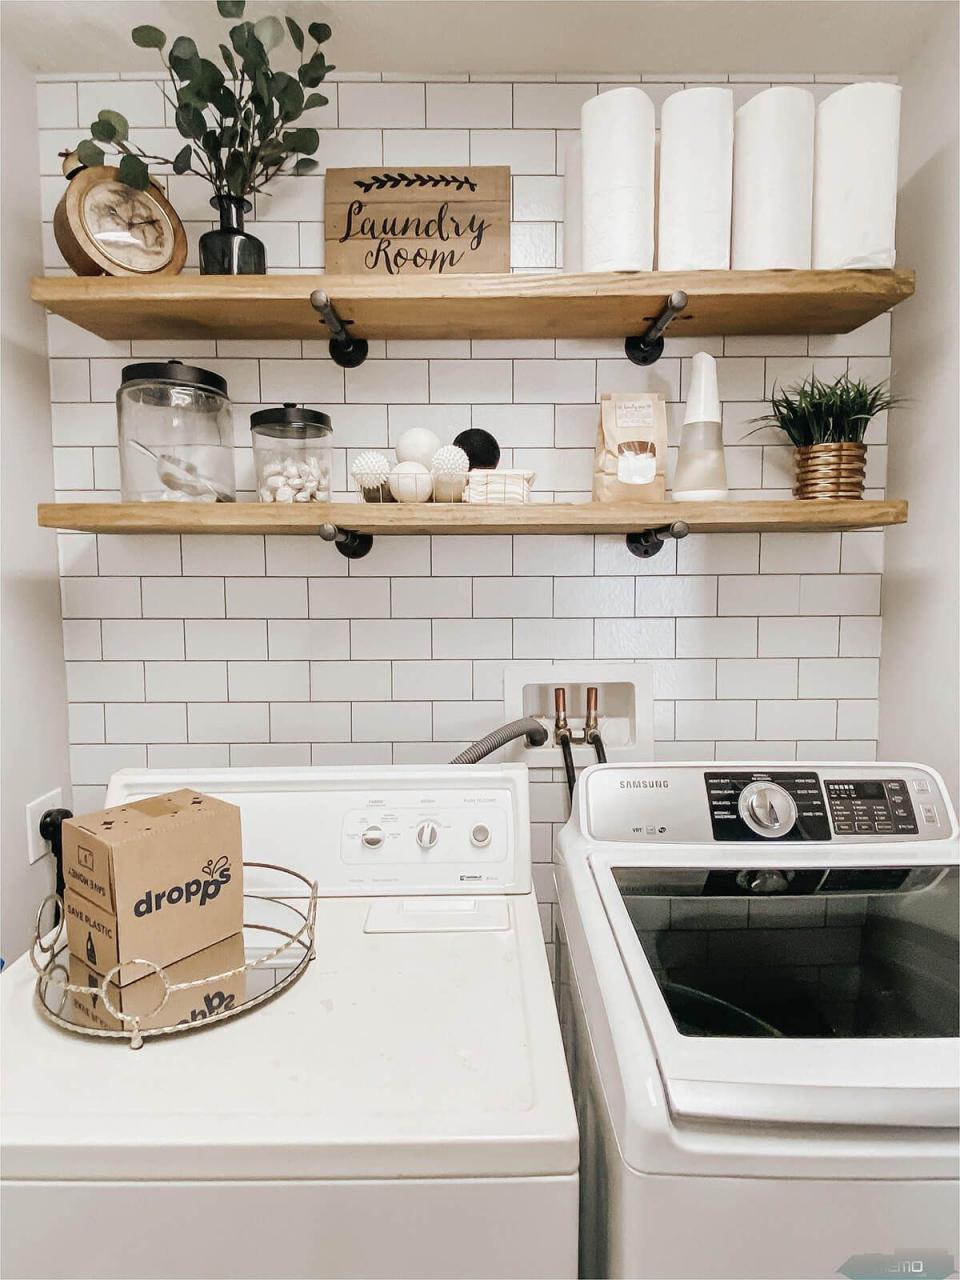 60 Farmhouse Laundry Room Ideas to Organize Your Laundry with Charm